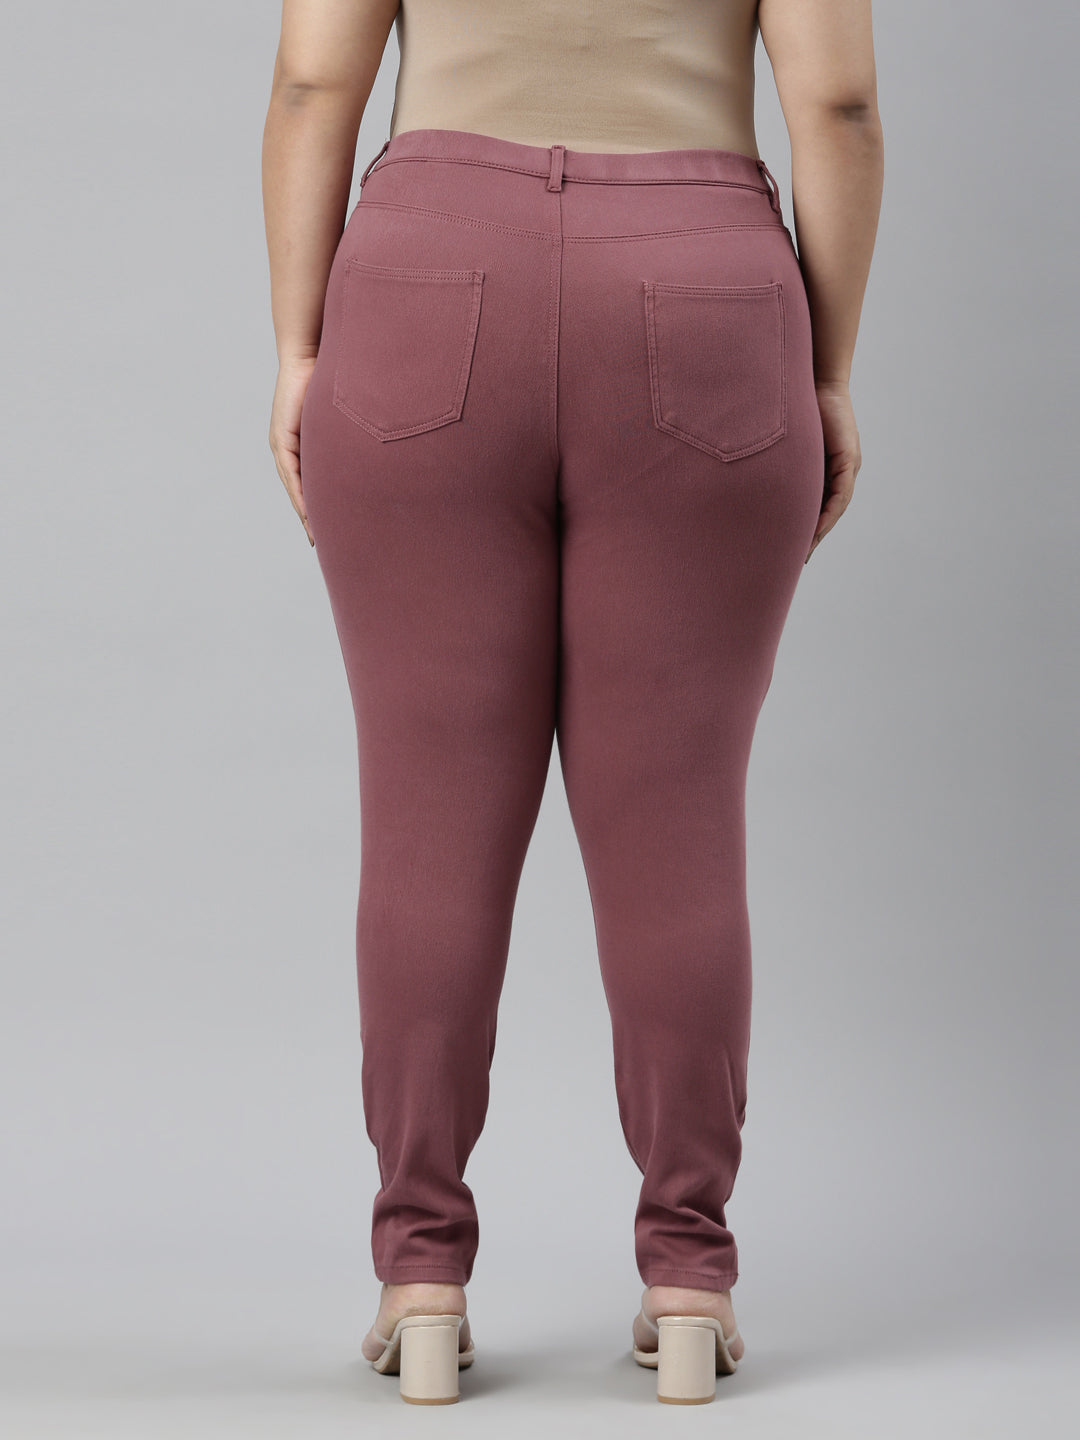 Women's Jeans and Jeggings Collection - Buy Online at GoColors – Page 2